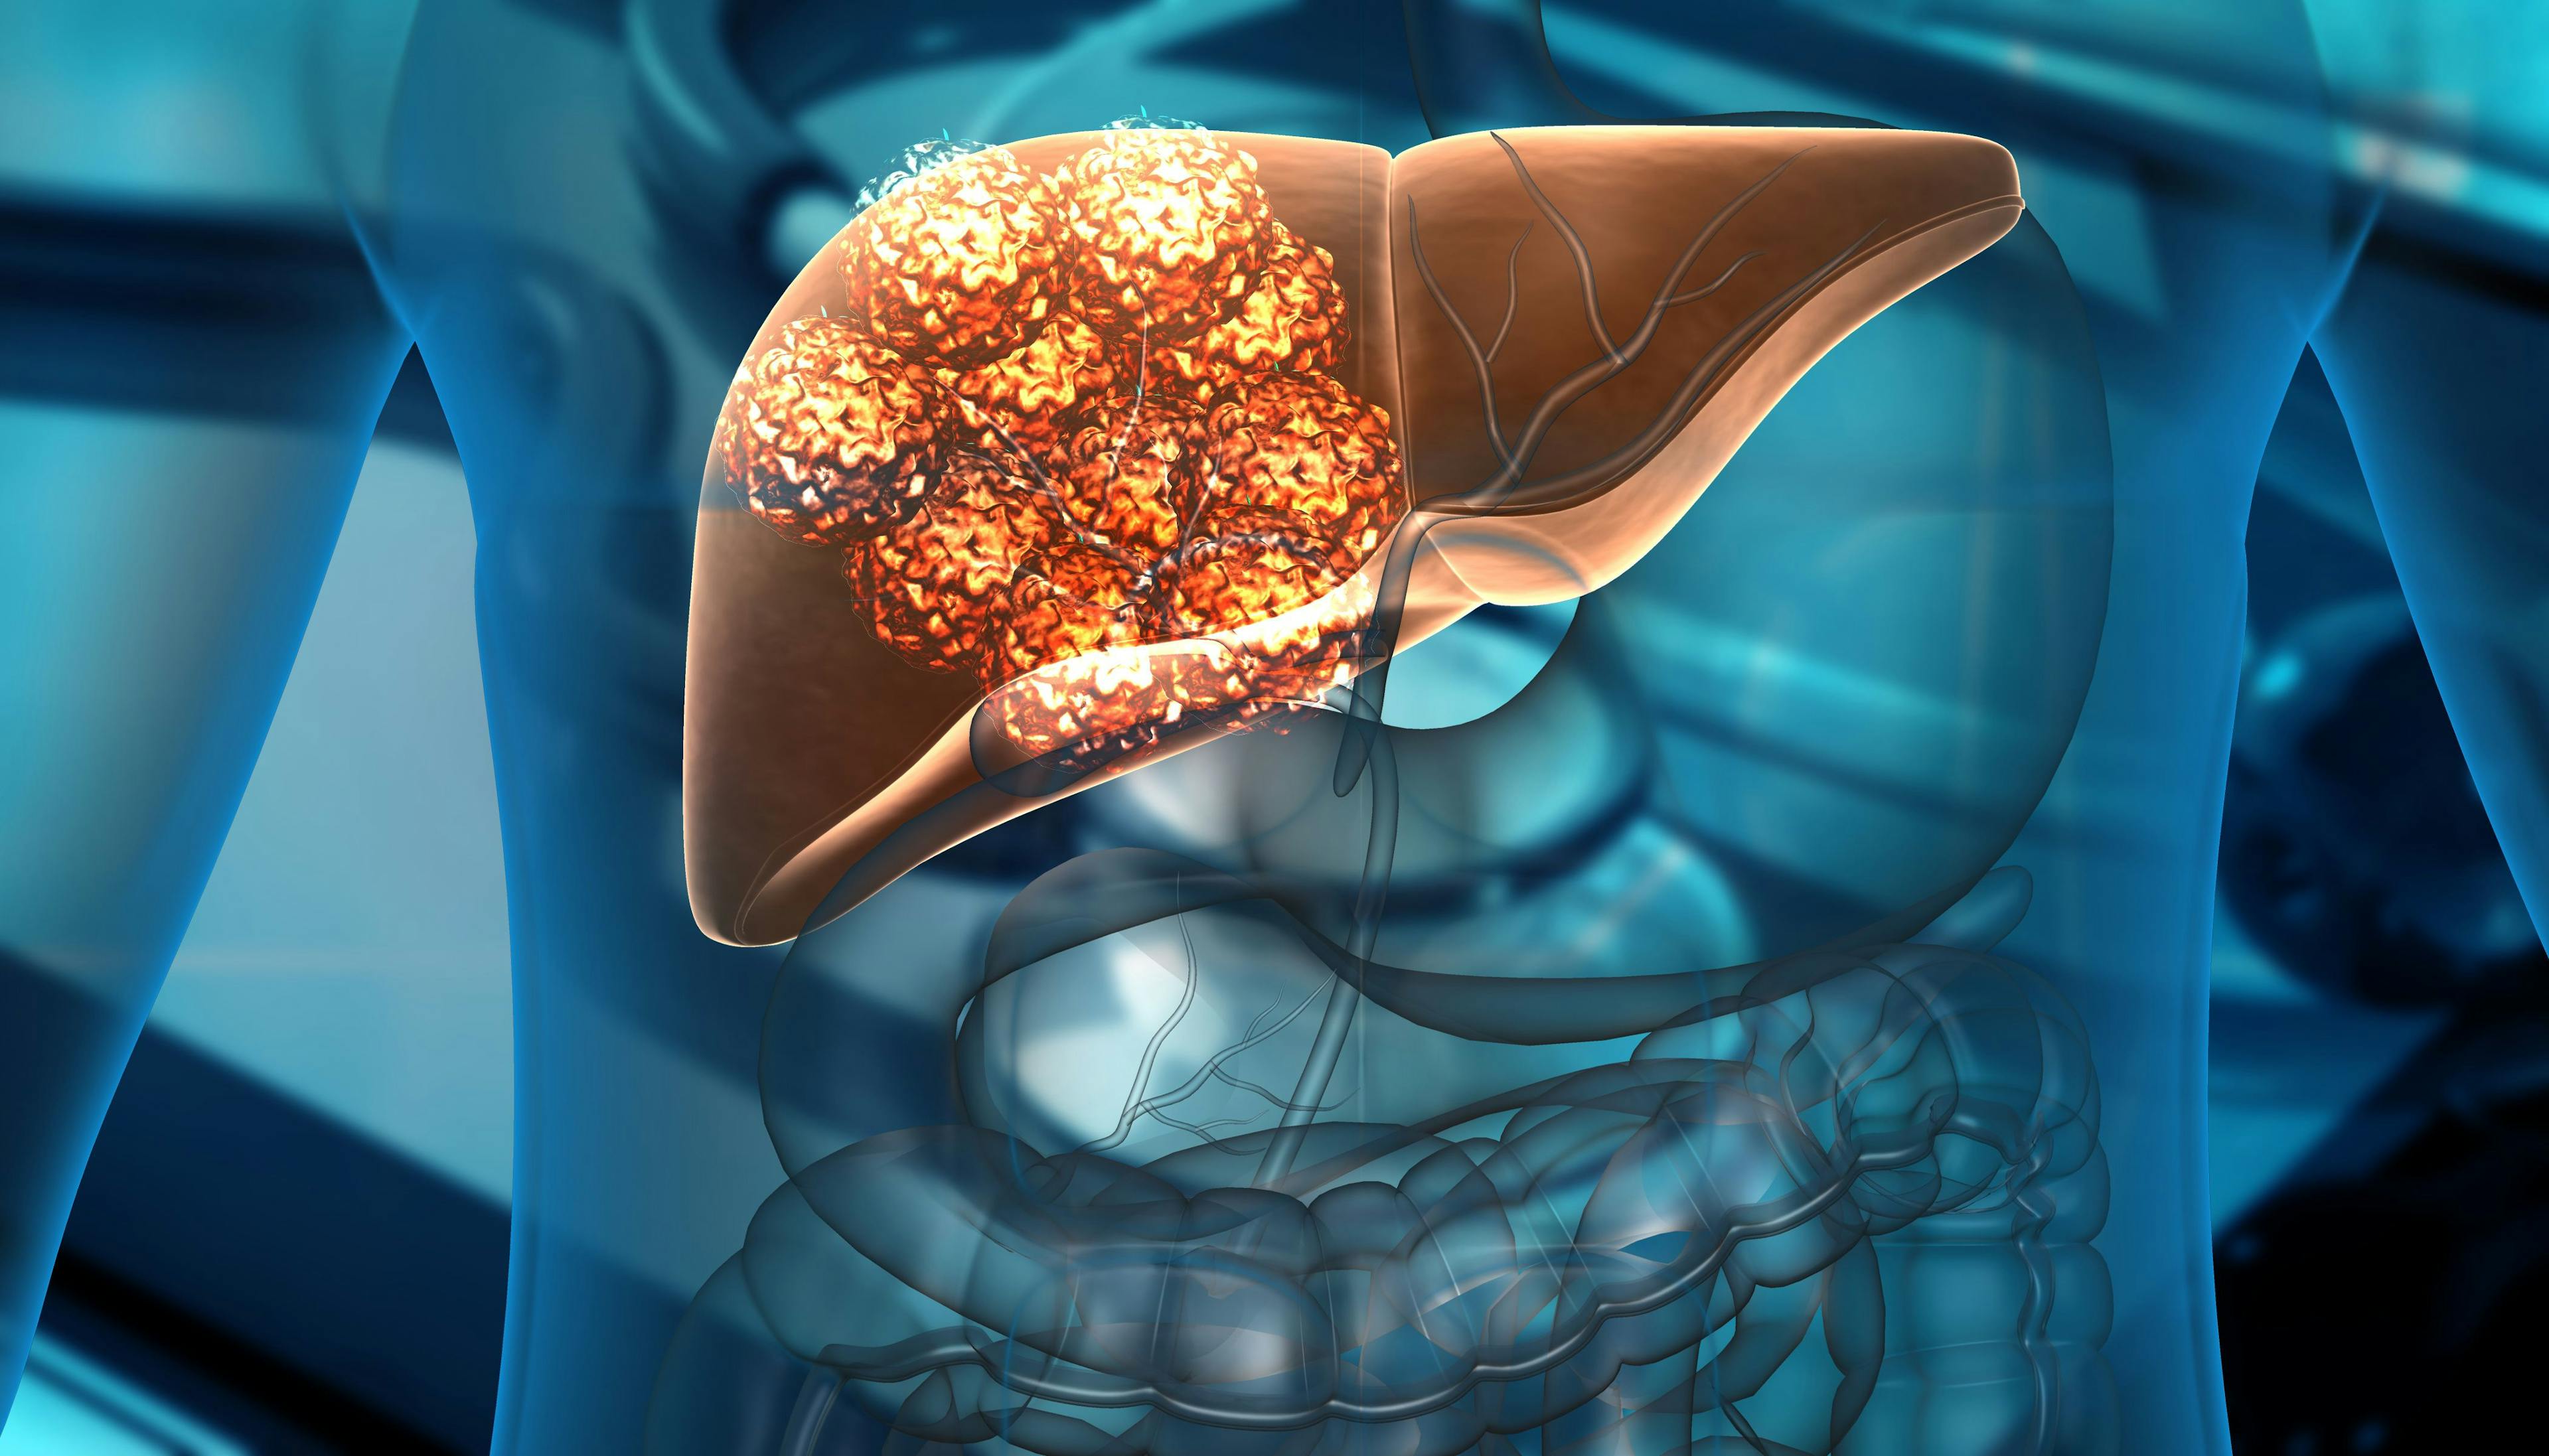 FDA Grants Fast Track Designation to Tumor-Infiltrating Lymphocyte Therapy for Liver Cancer